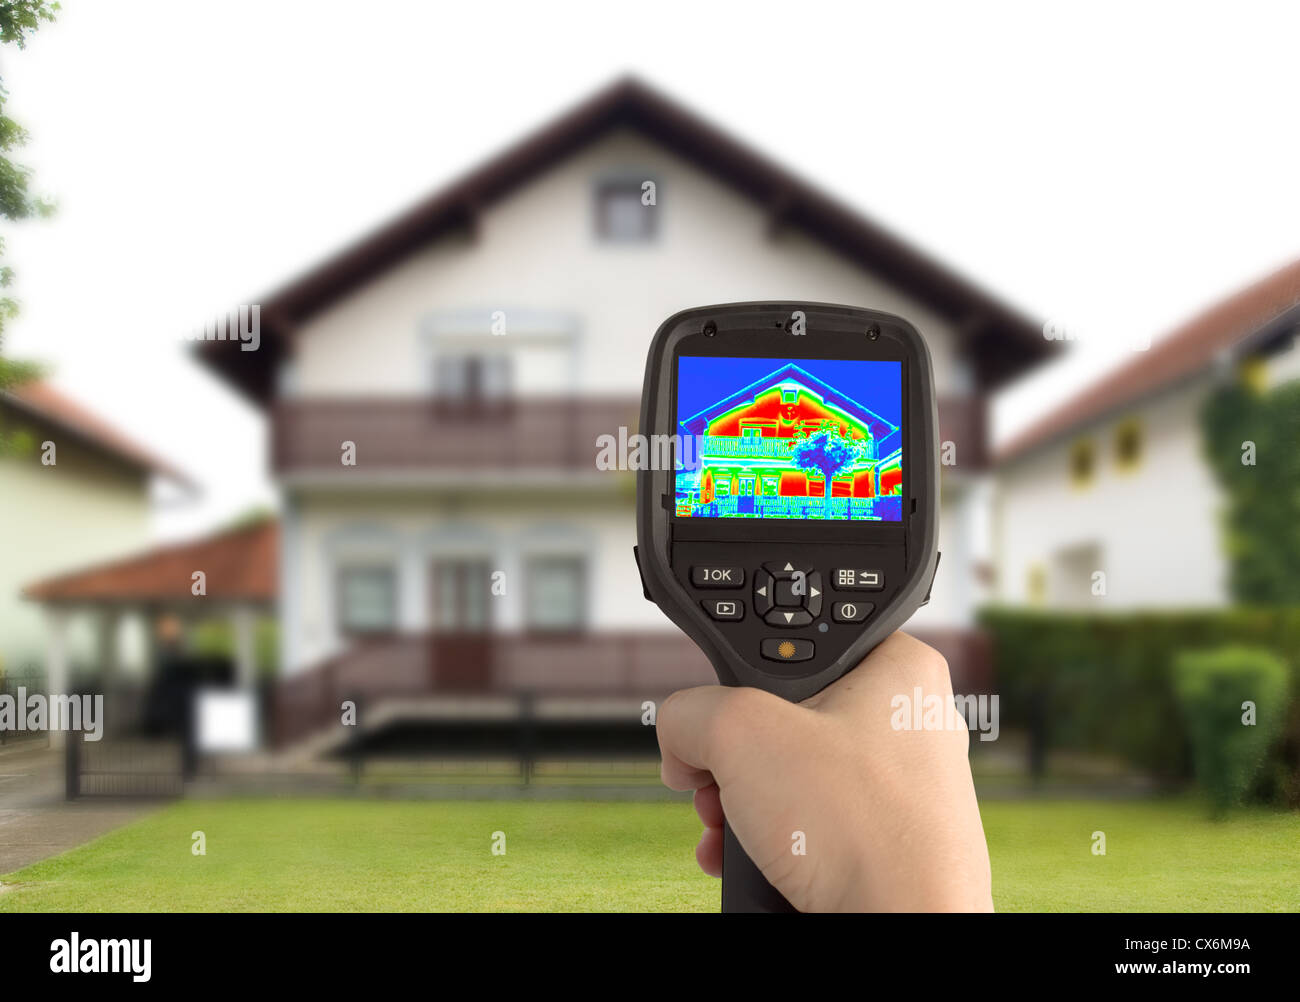 Heat Loss Detection of the House With Infrared Thermal Camera Stock Photo